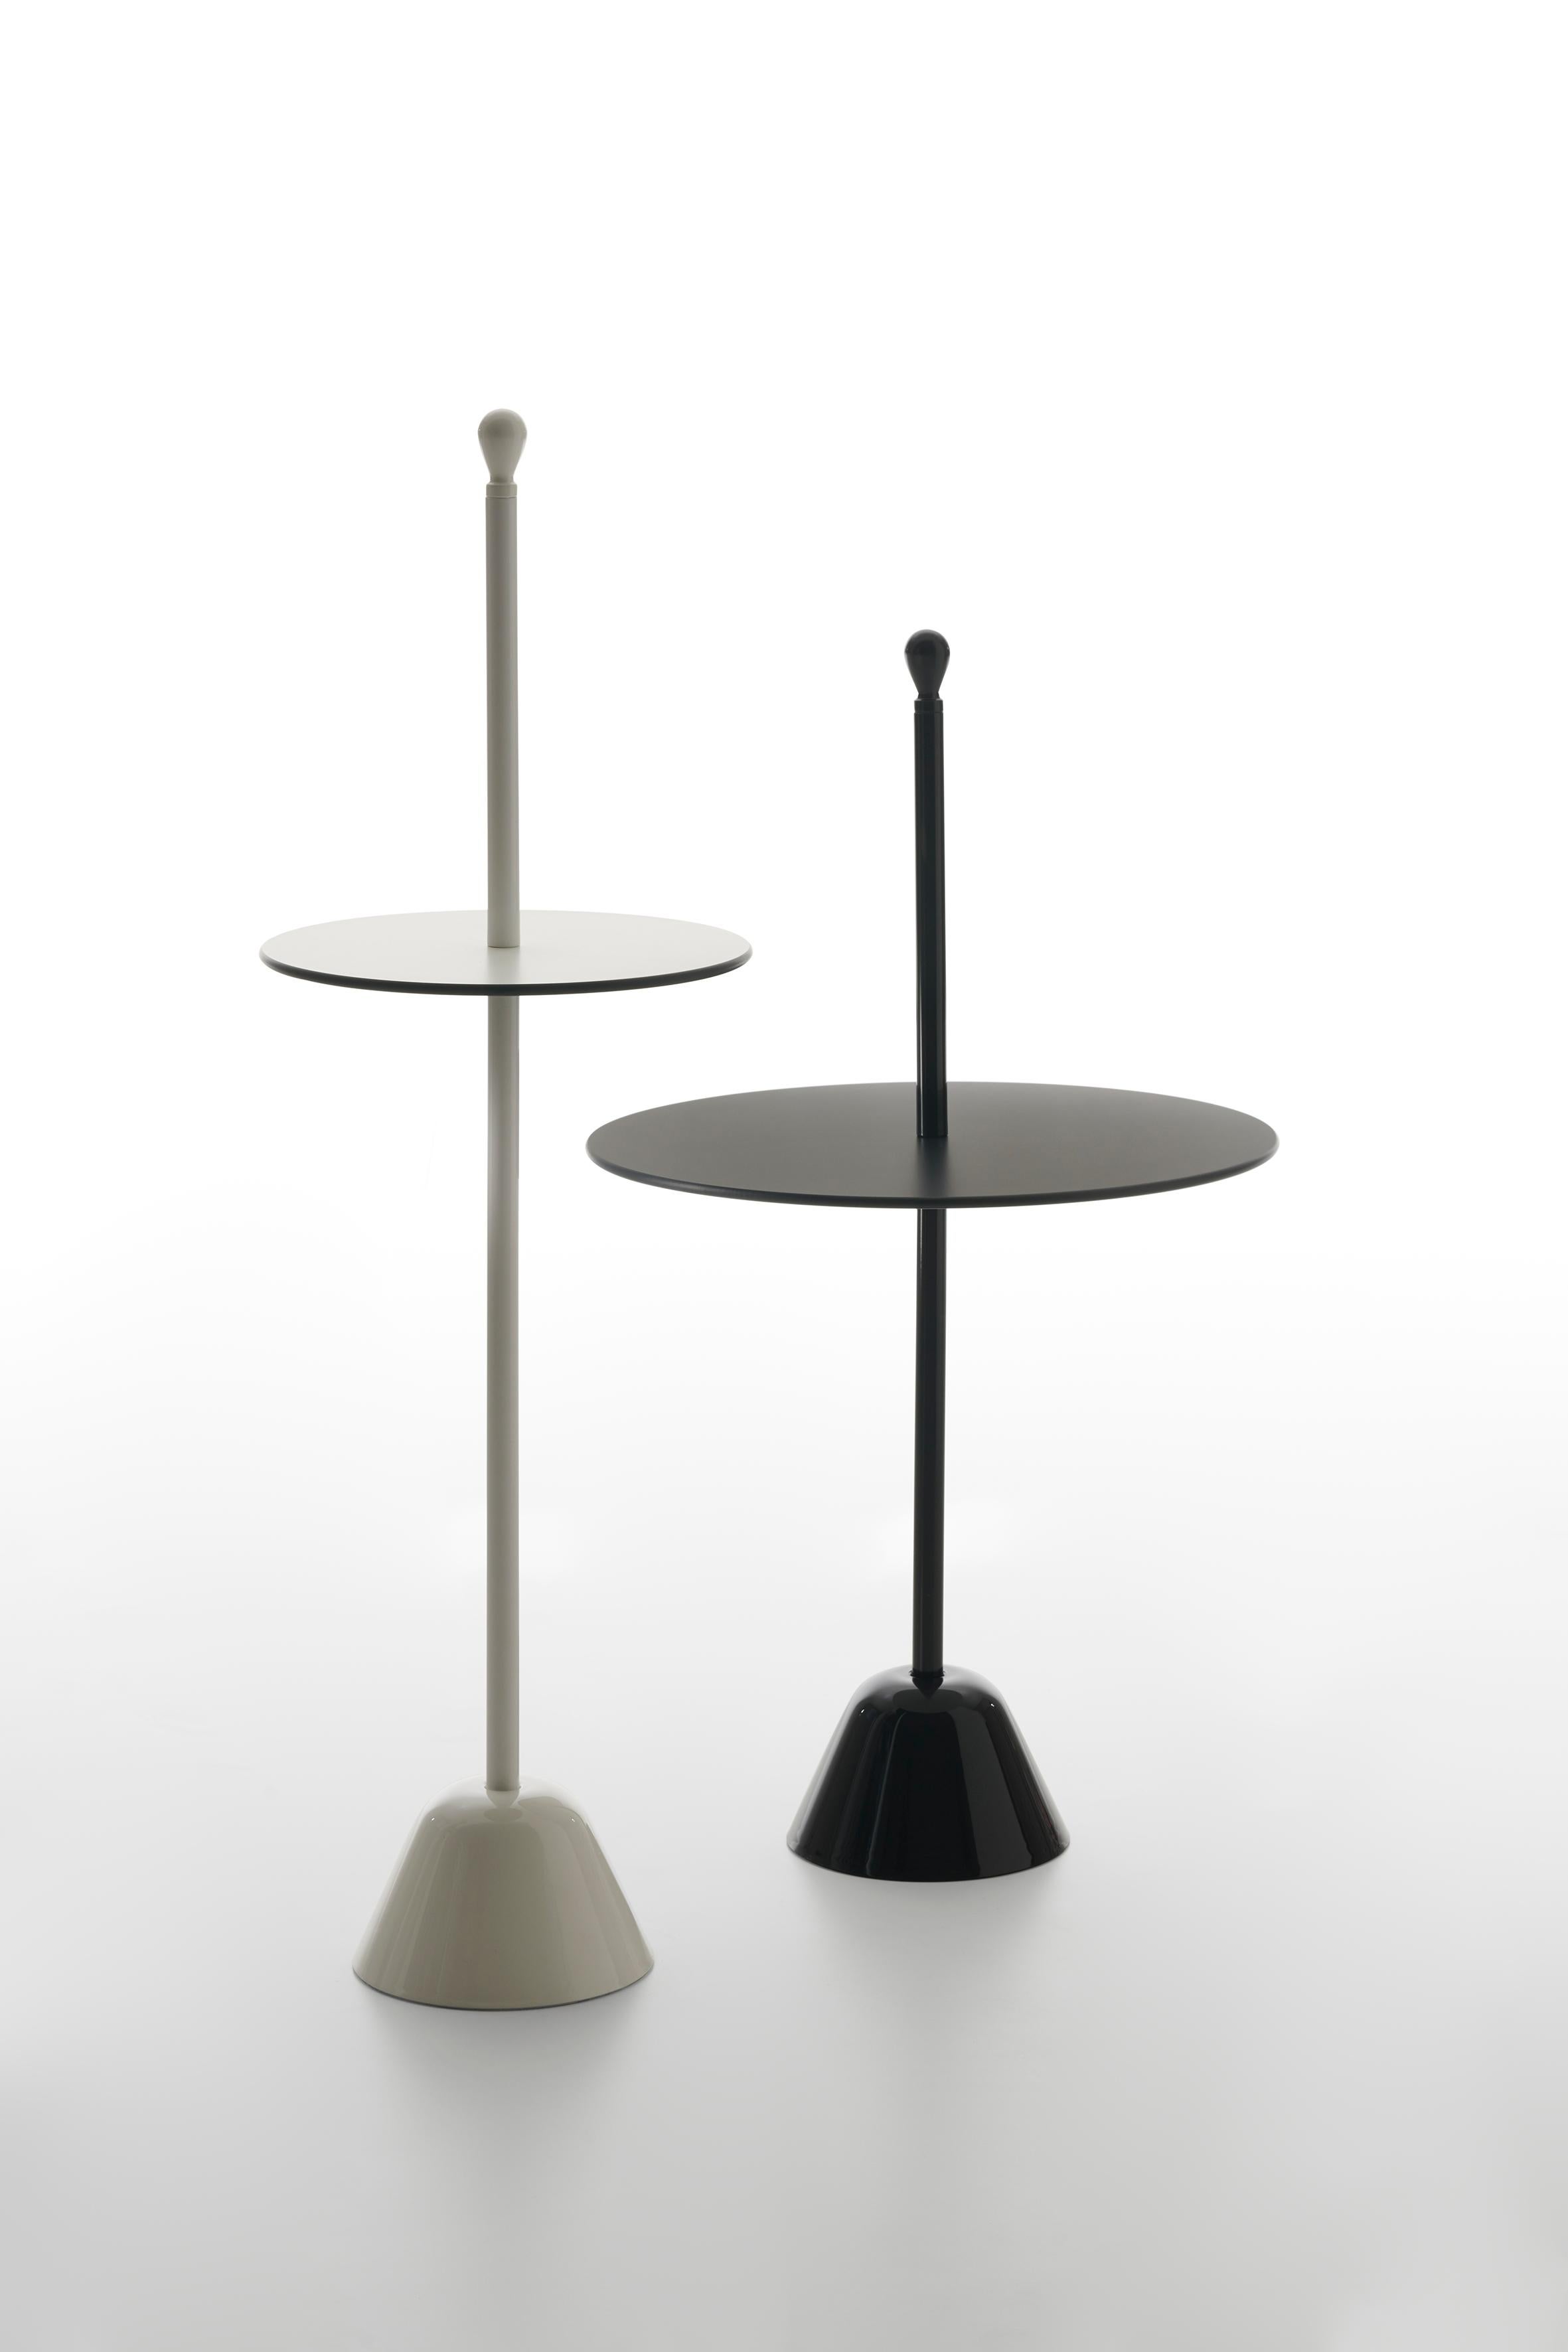 Zanotta Servomuto Low Table in White Top with Black Steel Frame by Achille Castiglioni

Base in polypropylene and steel rod painted, colour black, white or amaranth. Top in white/black, amaranth/ grey, terracotta/grey blue plastic